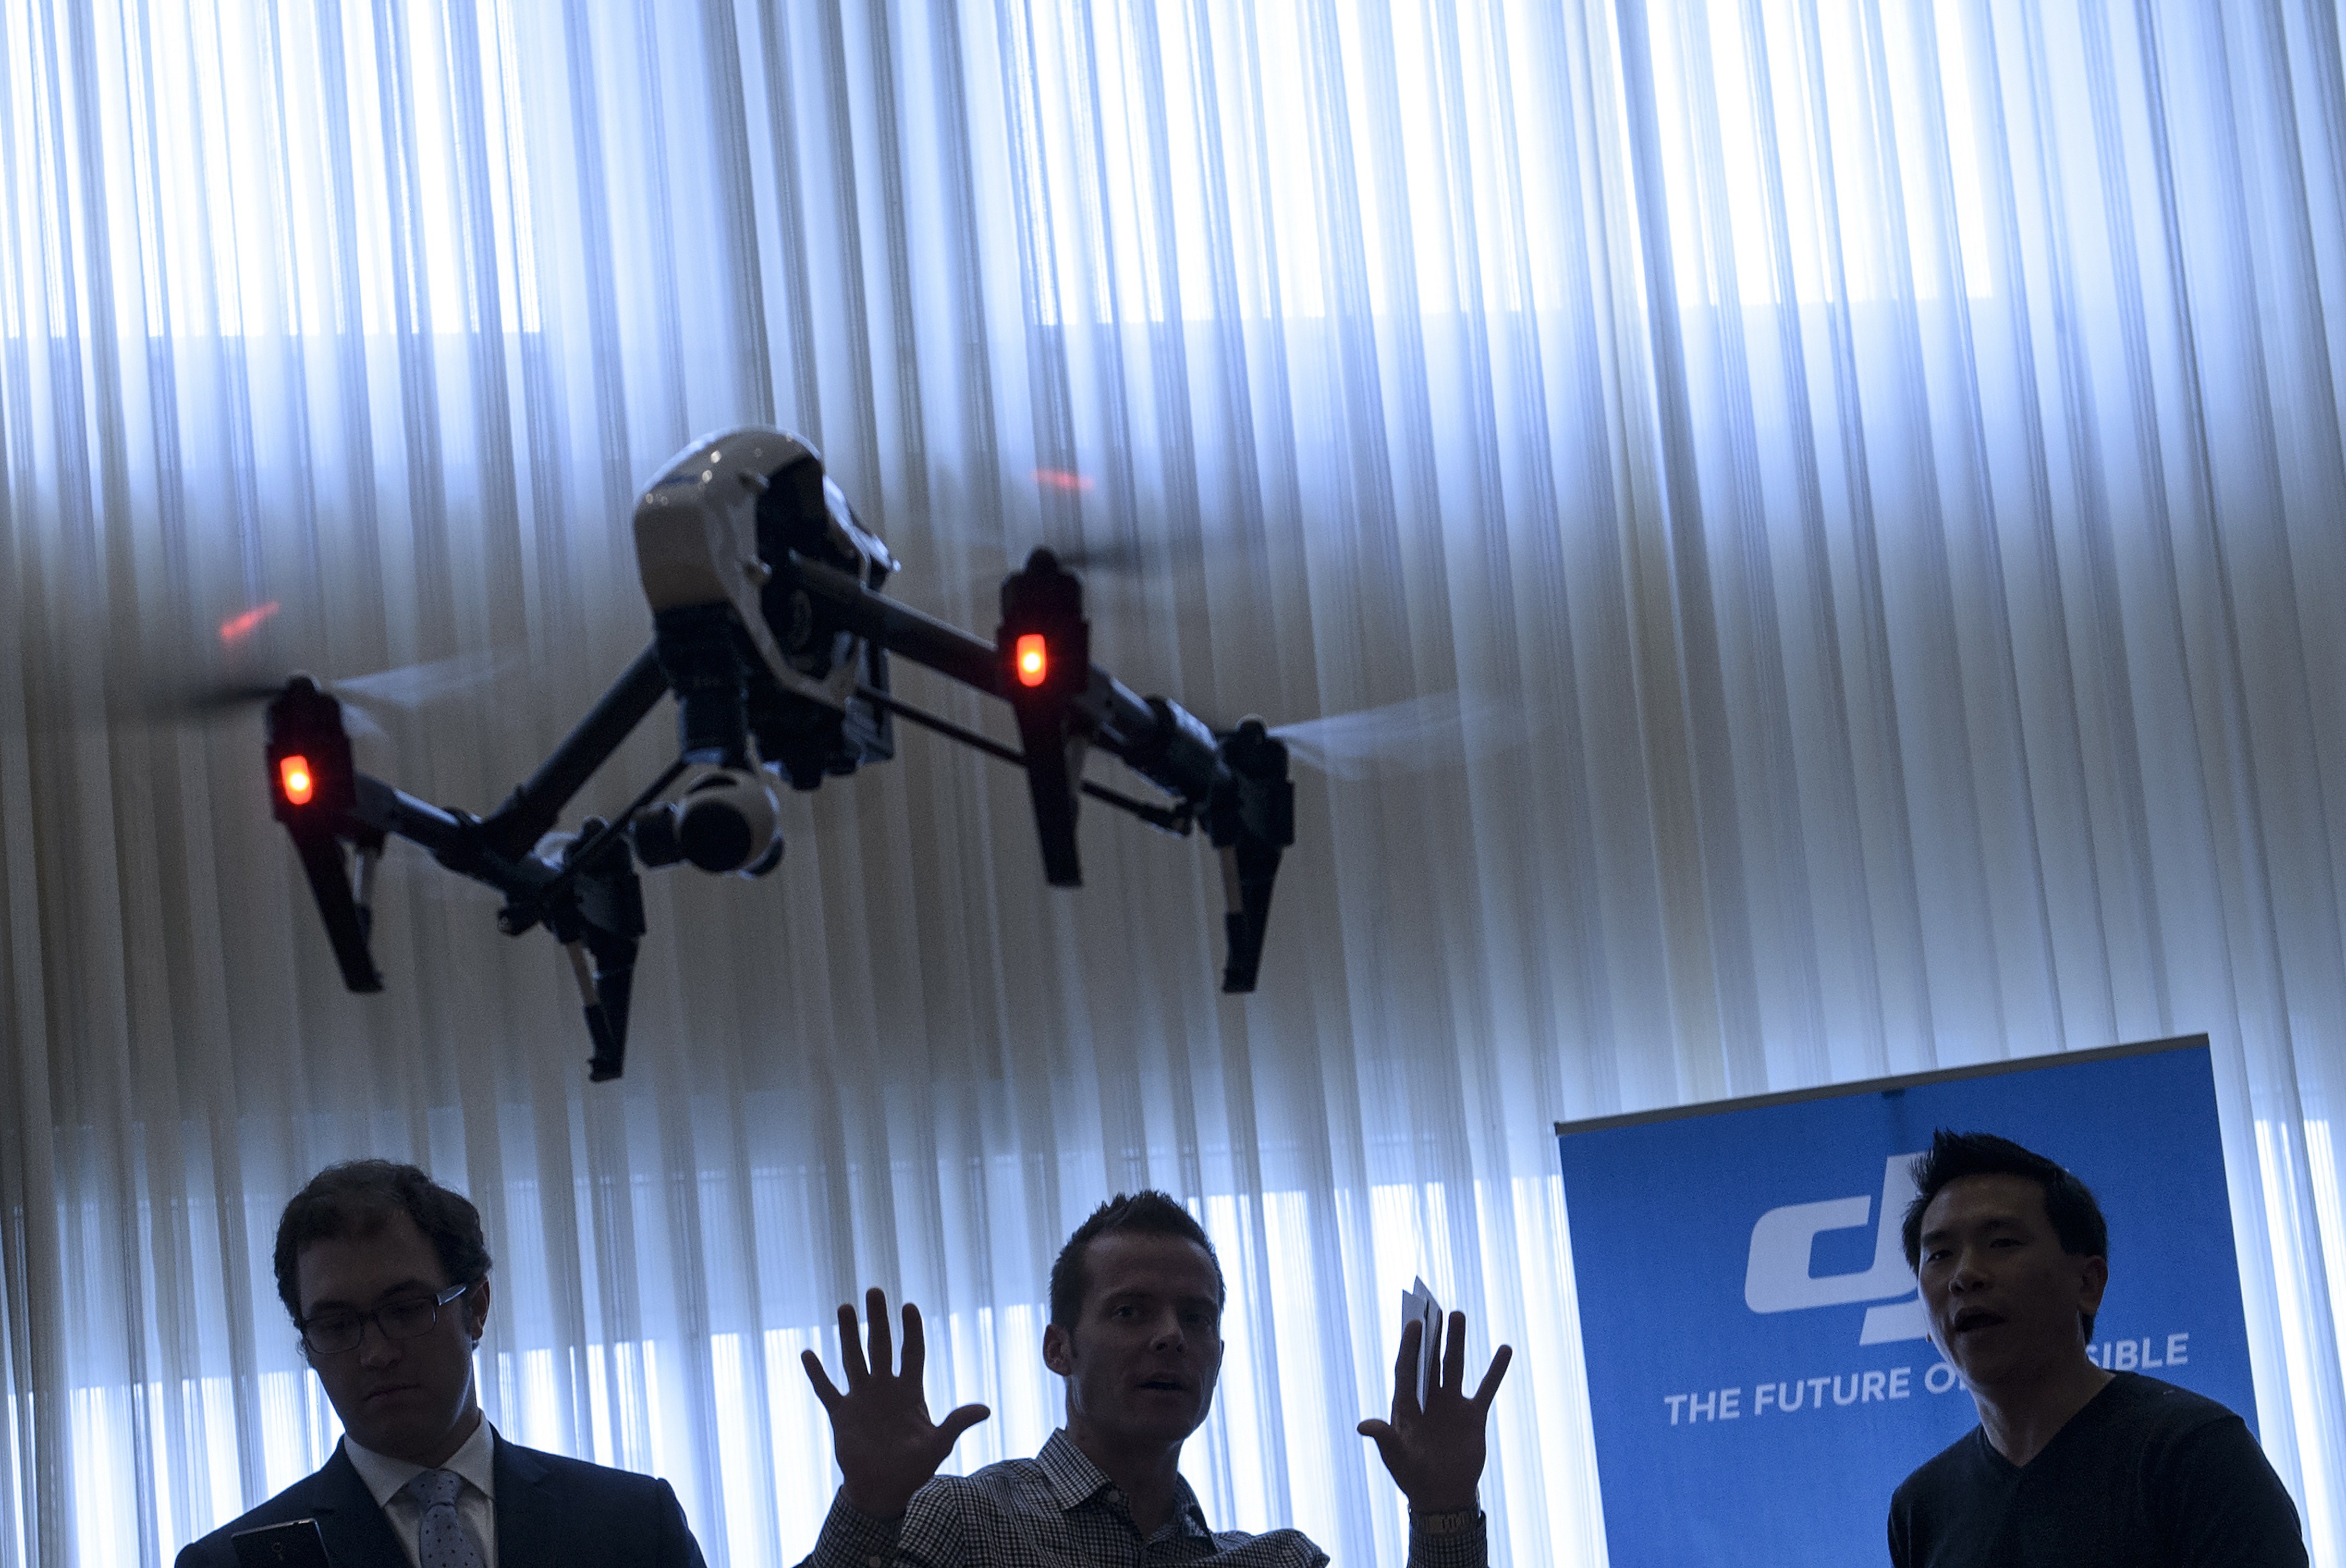 Staff from aerial imaging company DJI, demonstrate a remote control aircraft during a press conference by the Small UAV Coalition January 20, 2015 in Washington, DC. (Brendan Smialowski—AFP/Getty Images)